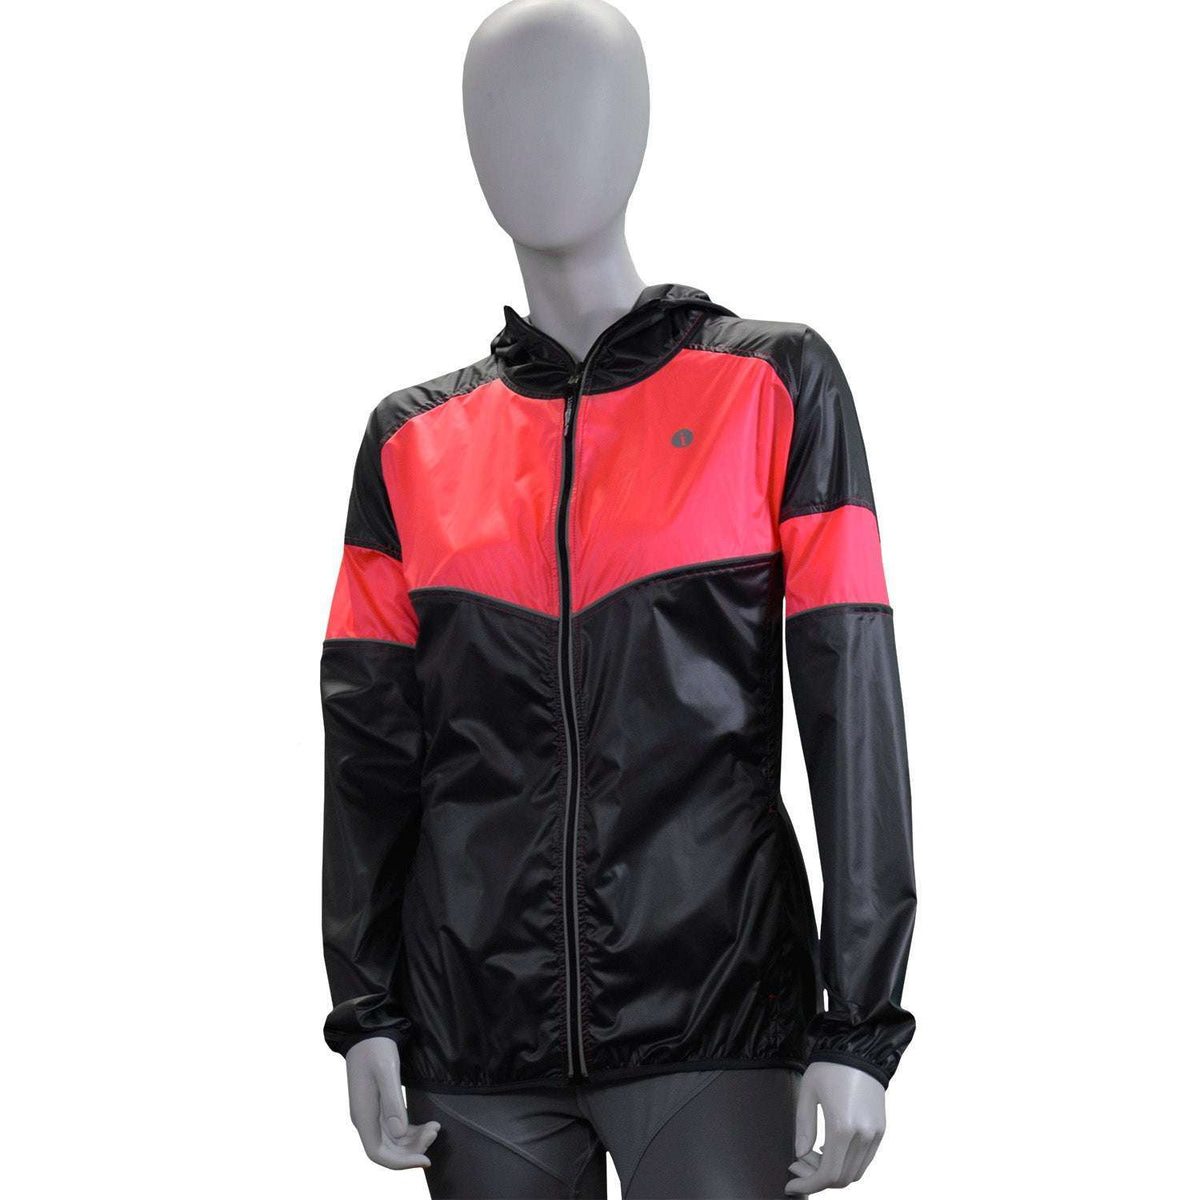 Venture Packable Women's Reflective Jacket in Graphite / Coral Glo